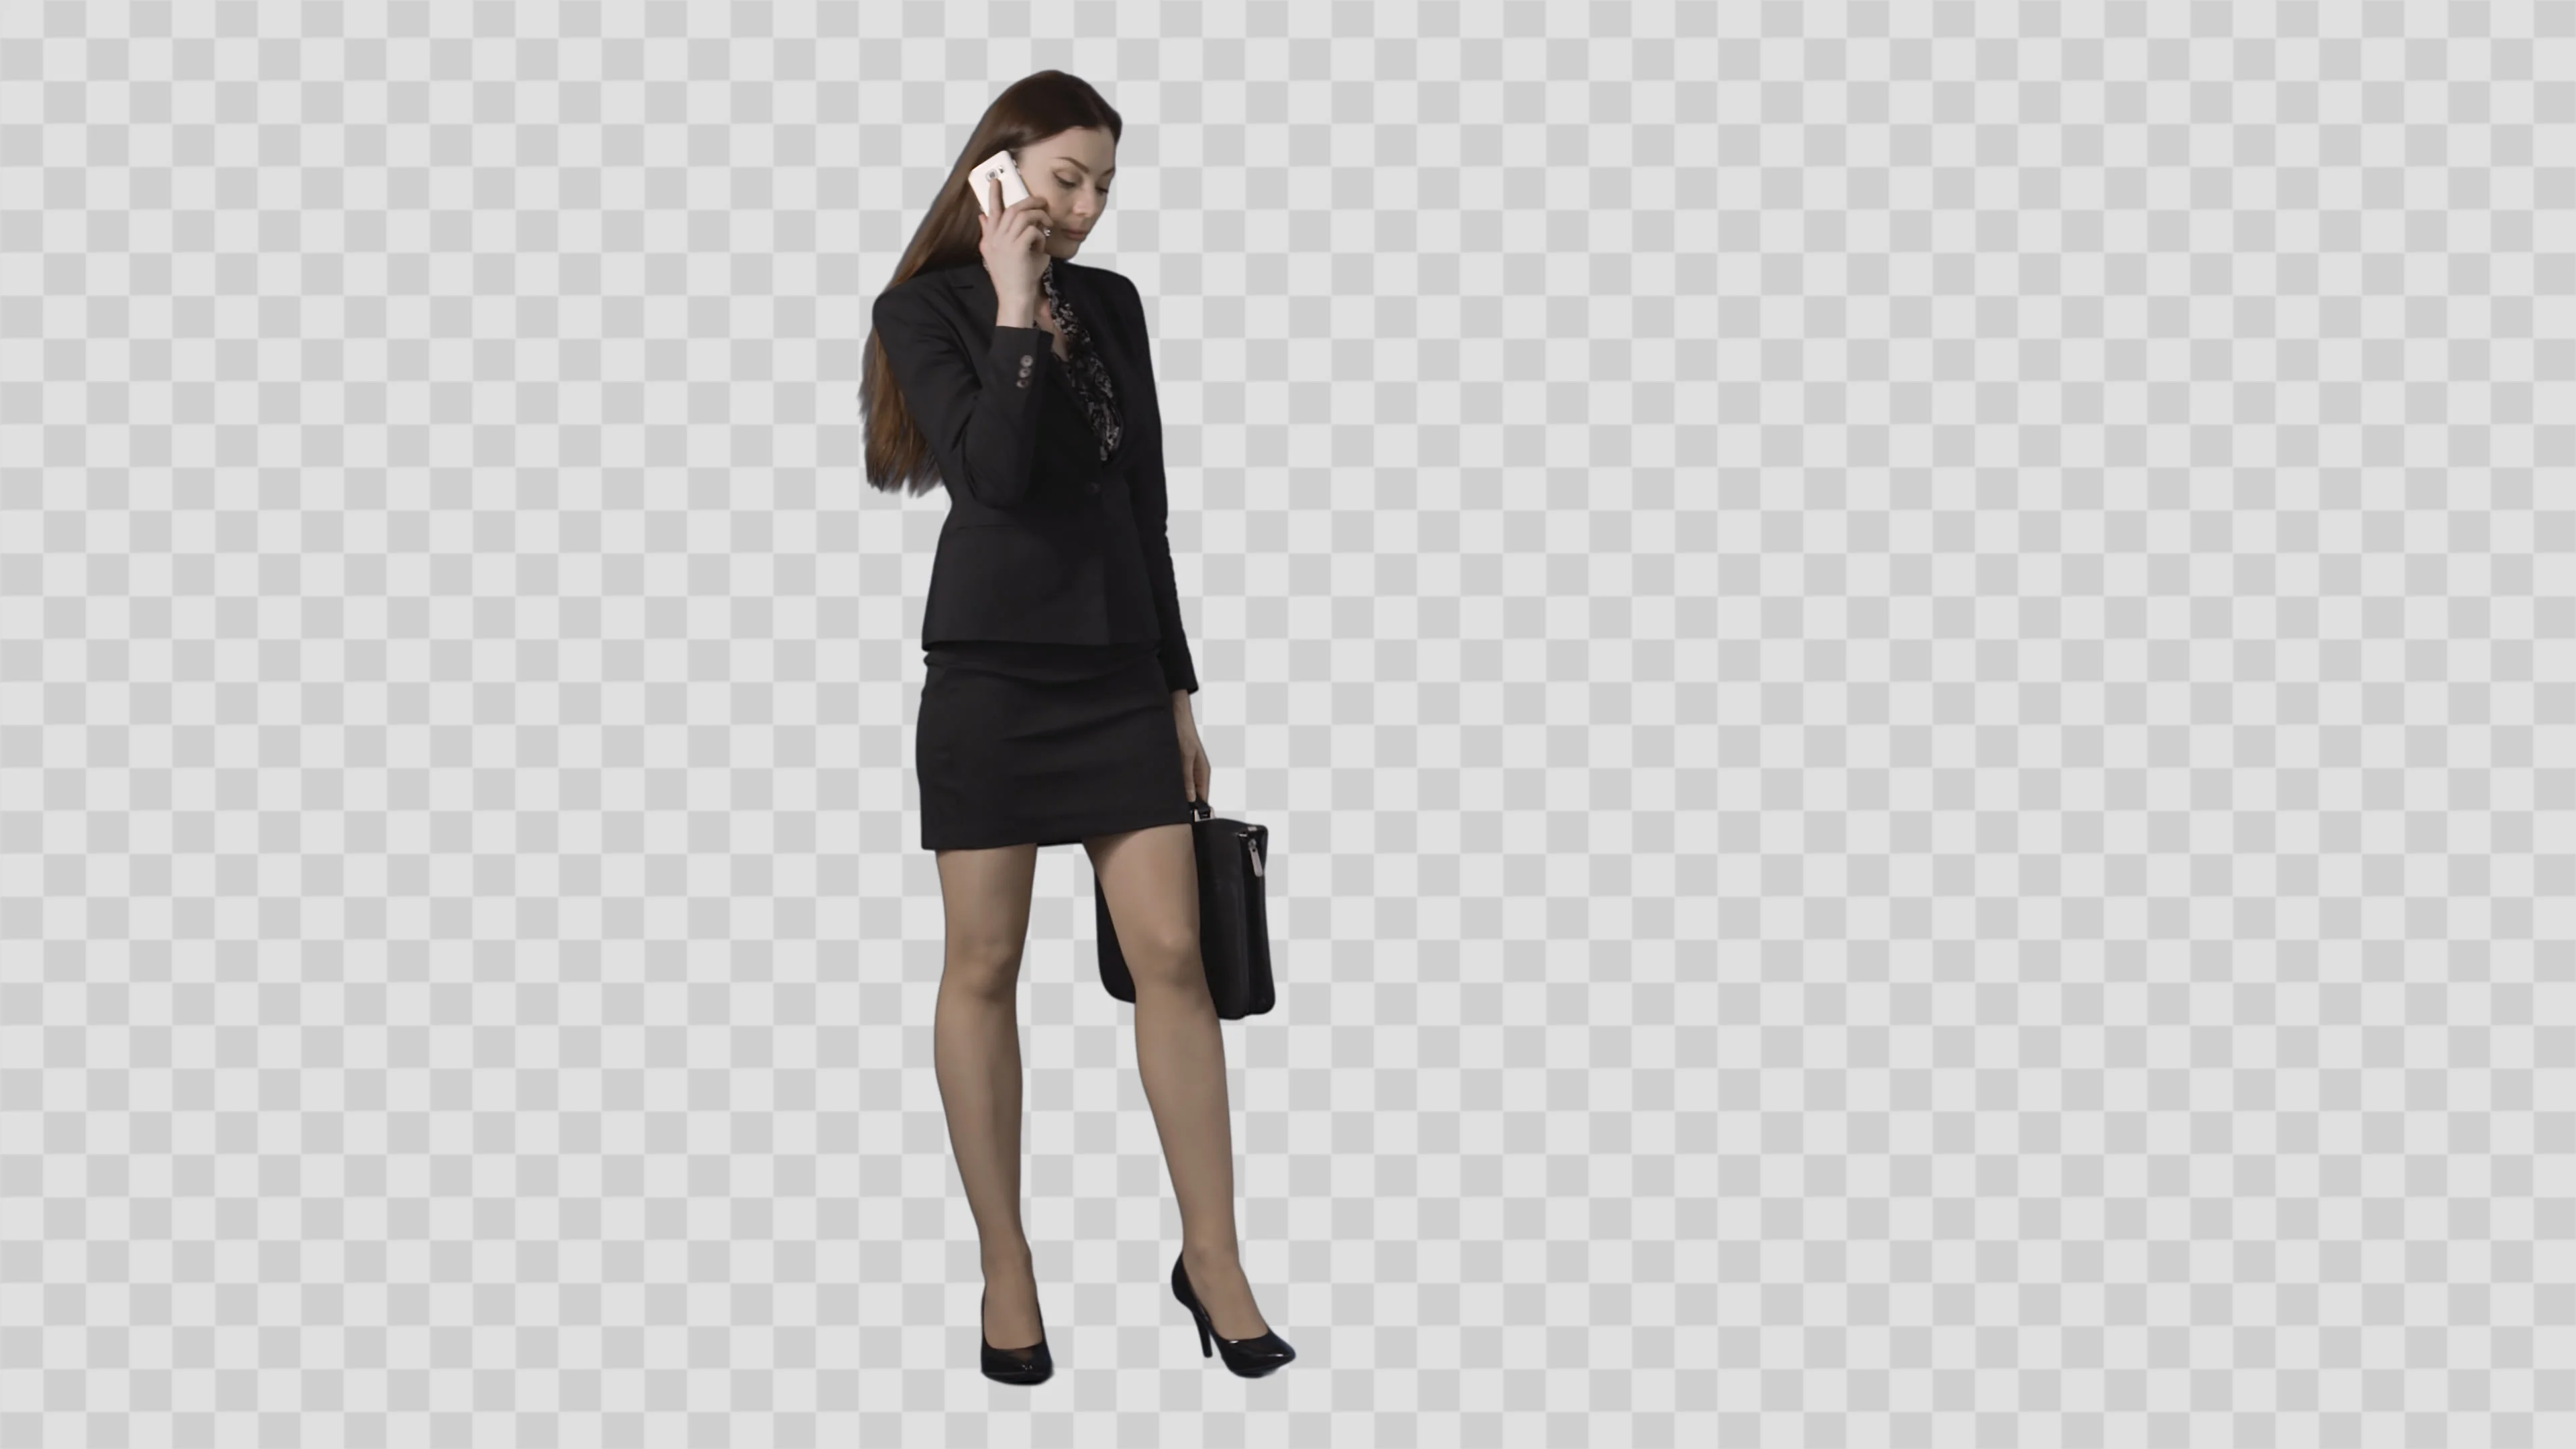 Business woman in tight skirt